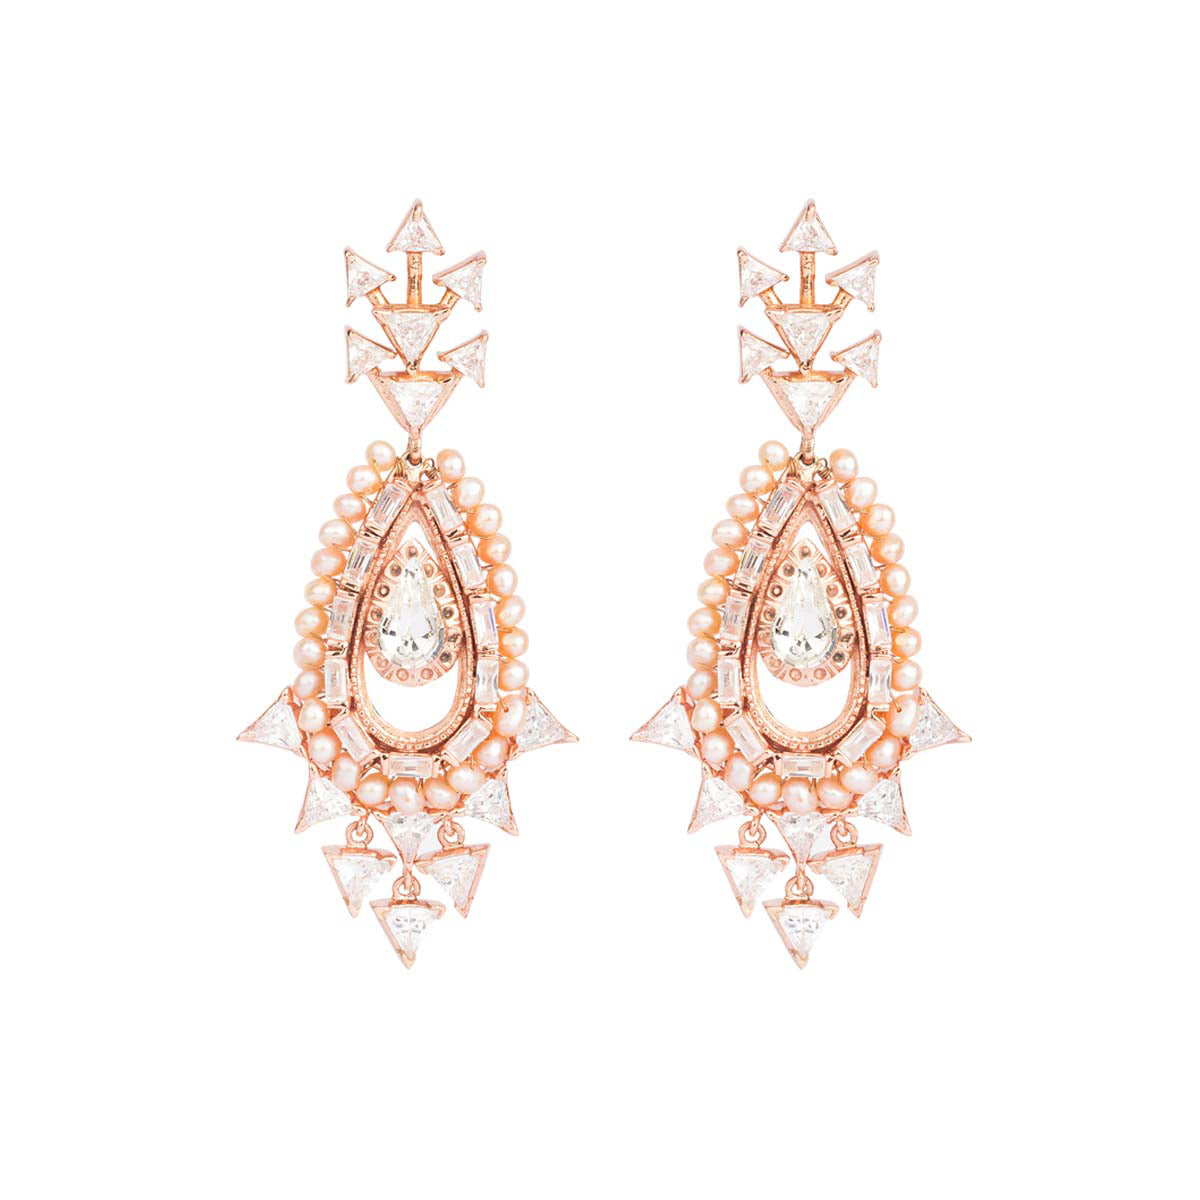 Finished with the shimmer of a celestial star, these dangling earrings are embedded with rose & gold stones.